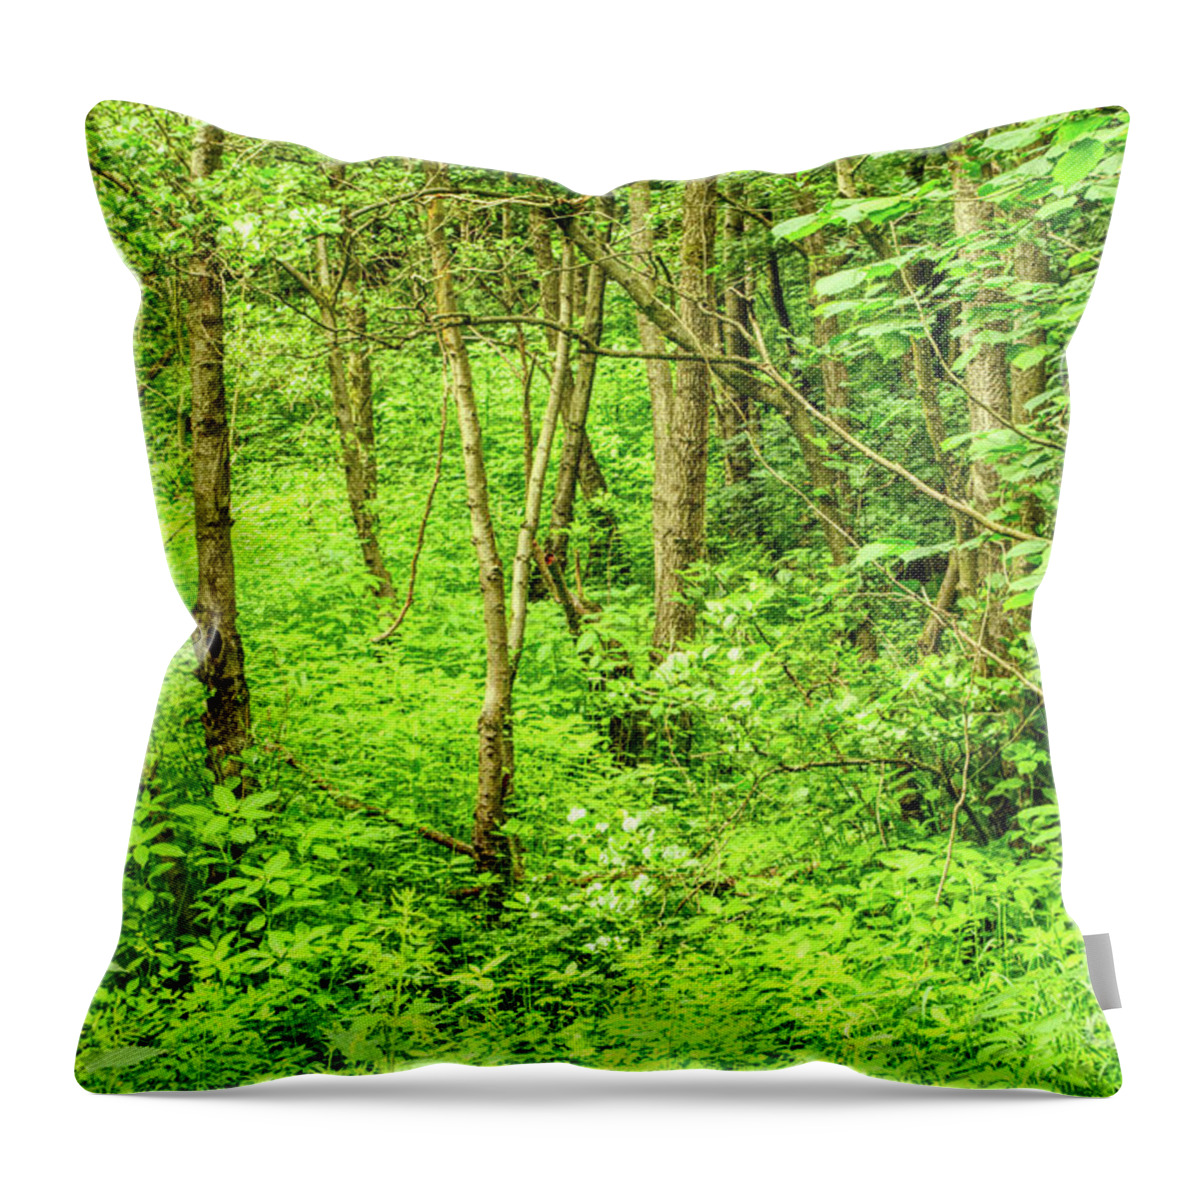 Digital Art Throw Pillow featuring the photograph Hopwood Woods Nature Reserve Manchester England UK by Pics By Tony